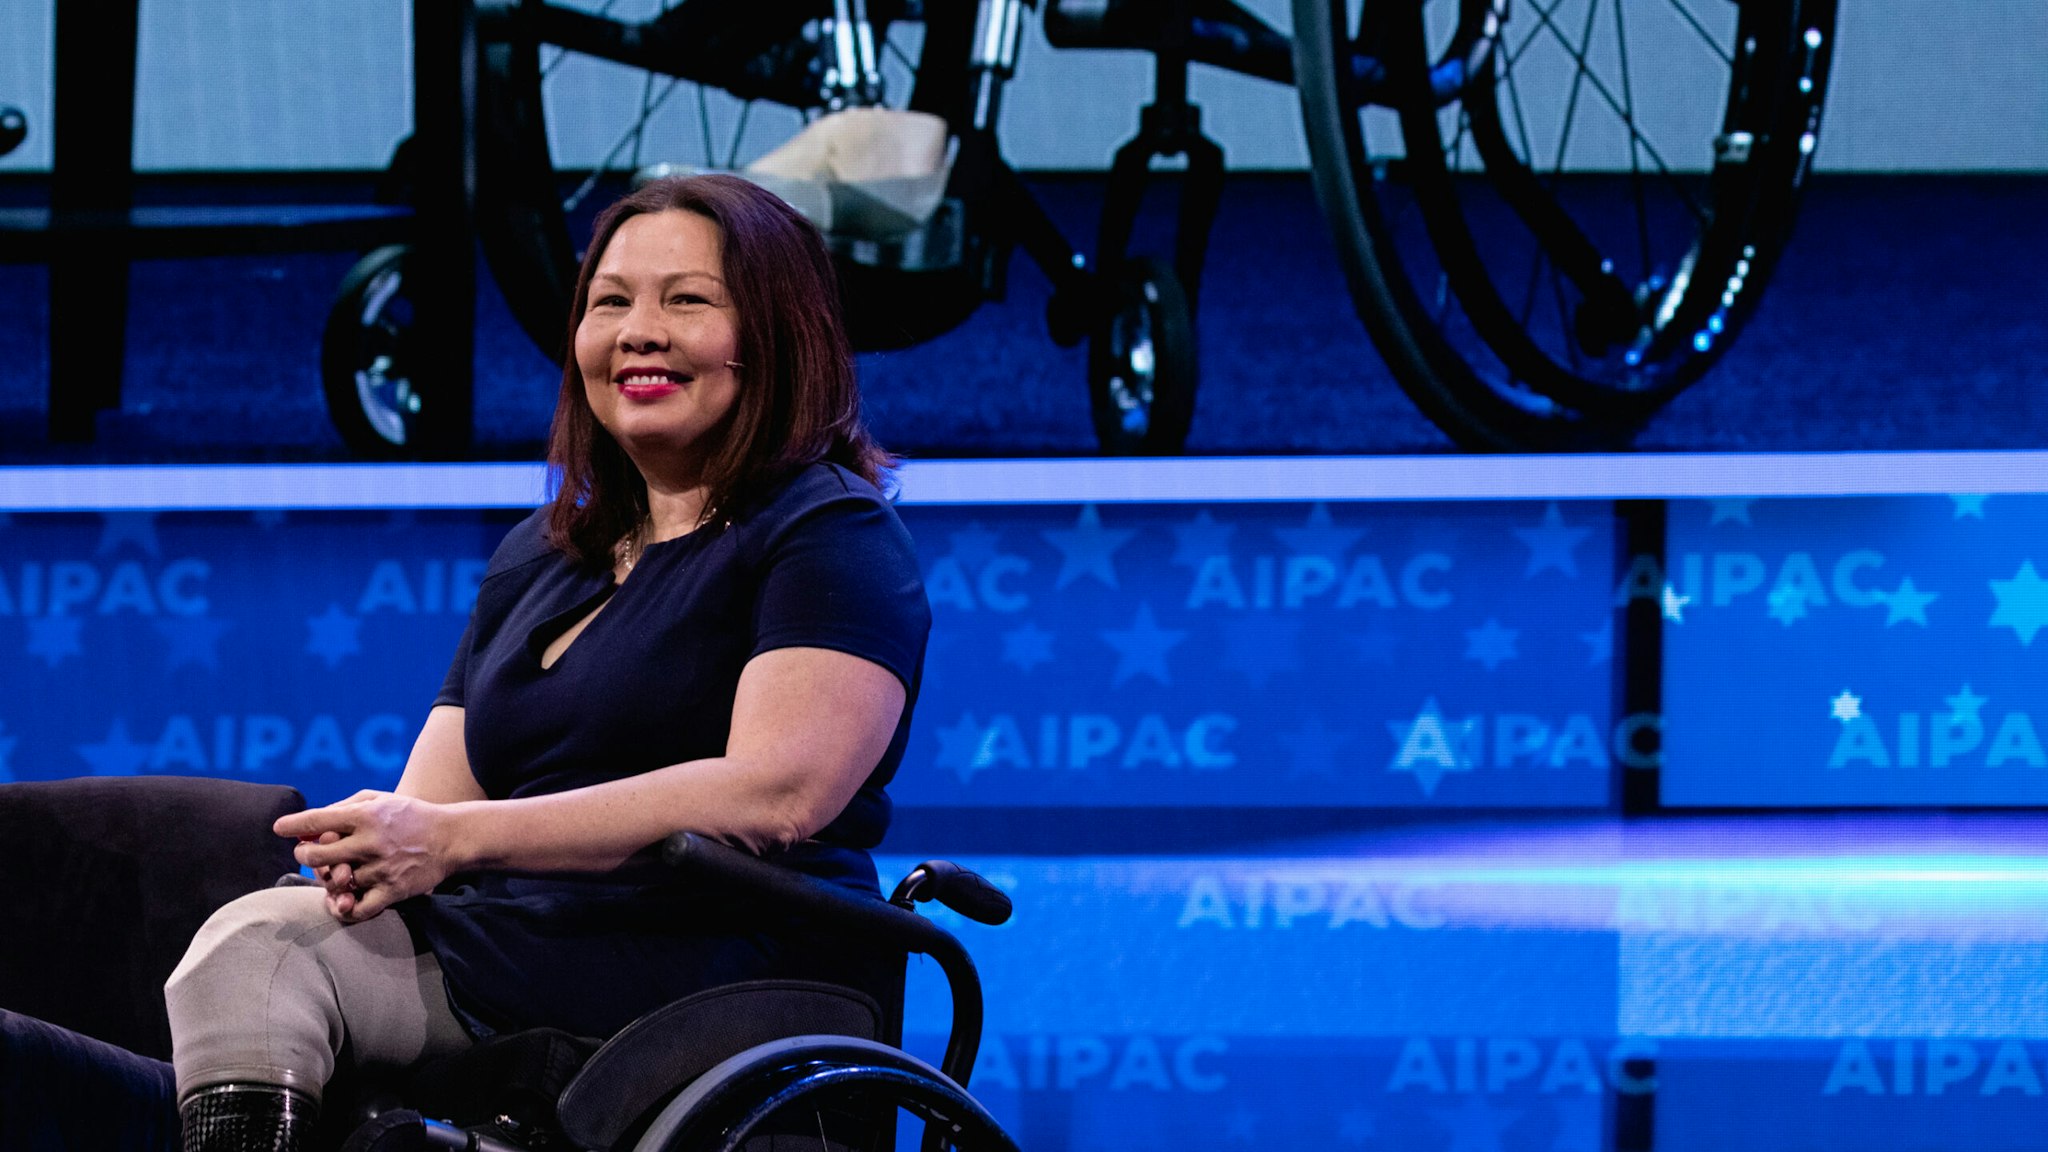 Senator Tammy Duckworth (D-IL), speaks at the 2019 American Israel Public Affairs Committee (AIPAC) Policy Conference, at the Walter E. Washington Convention Center in Washington, D.C., on Monday, March 25, 2019. (Photo by Cheriss May/NurPhoto via Getty Images)